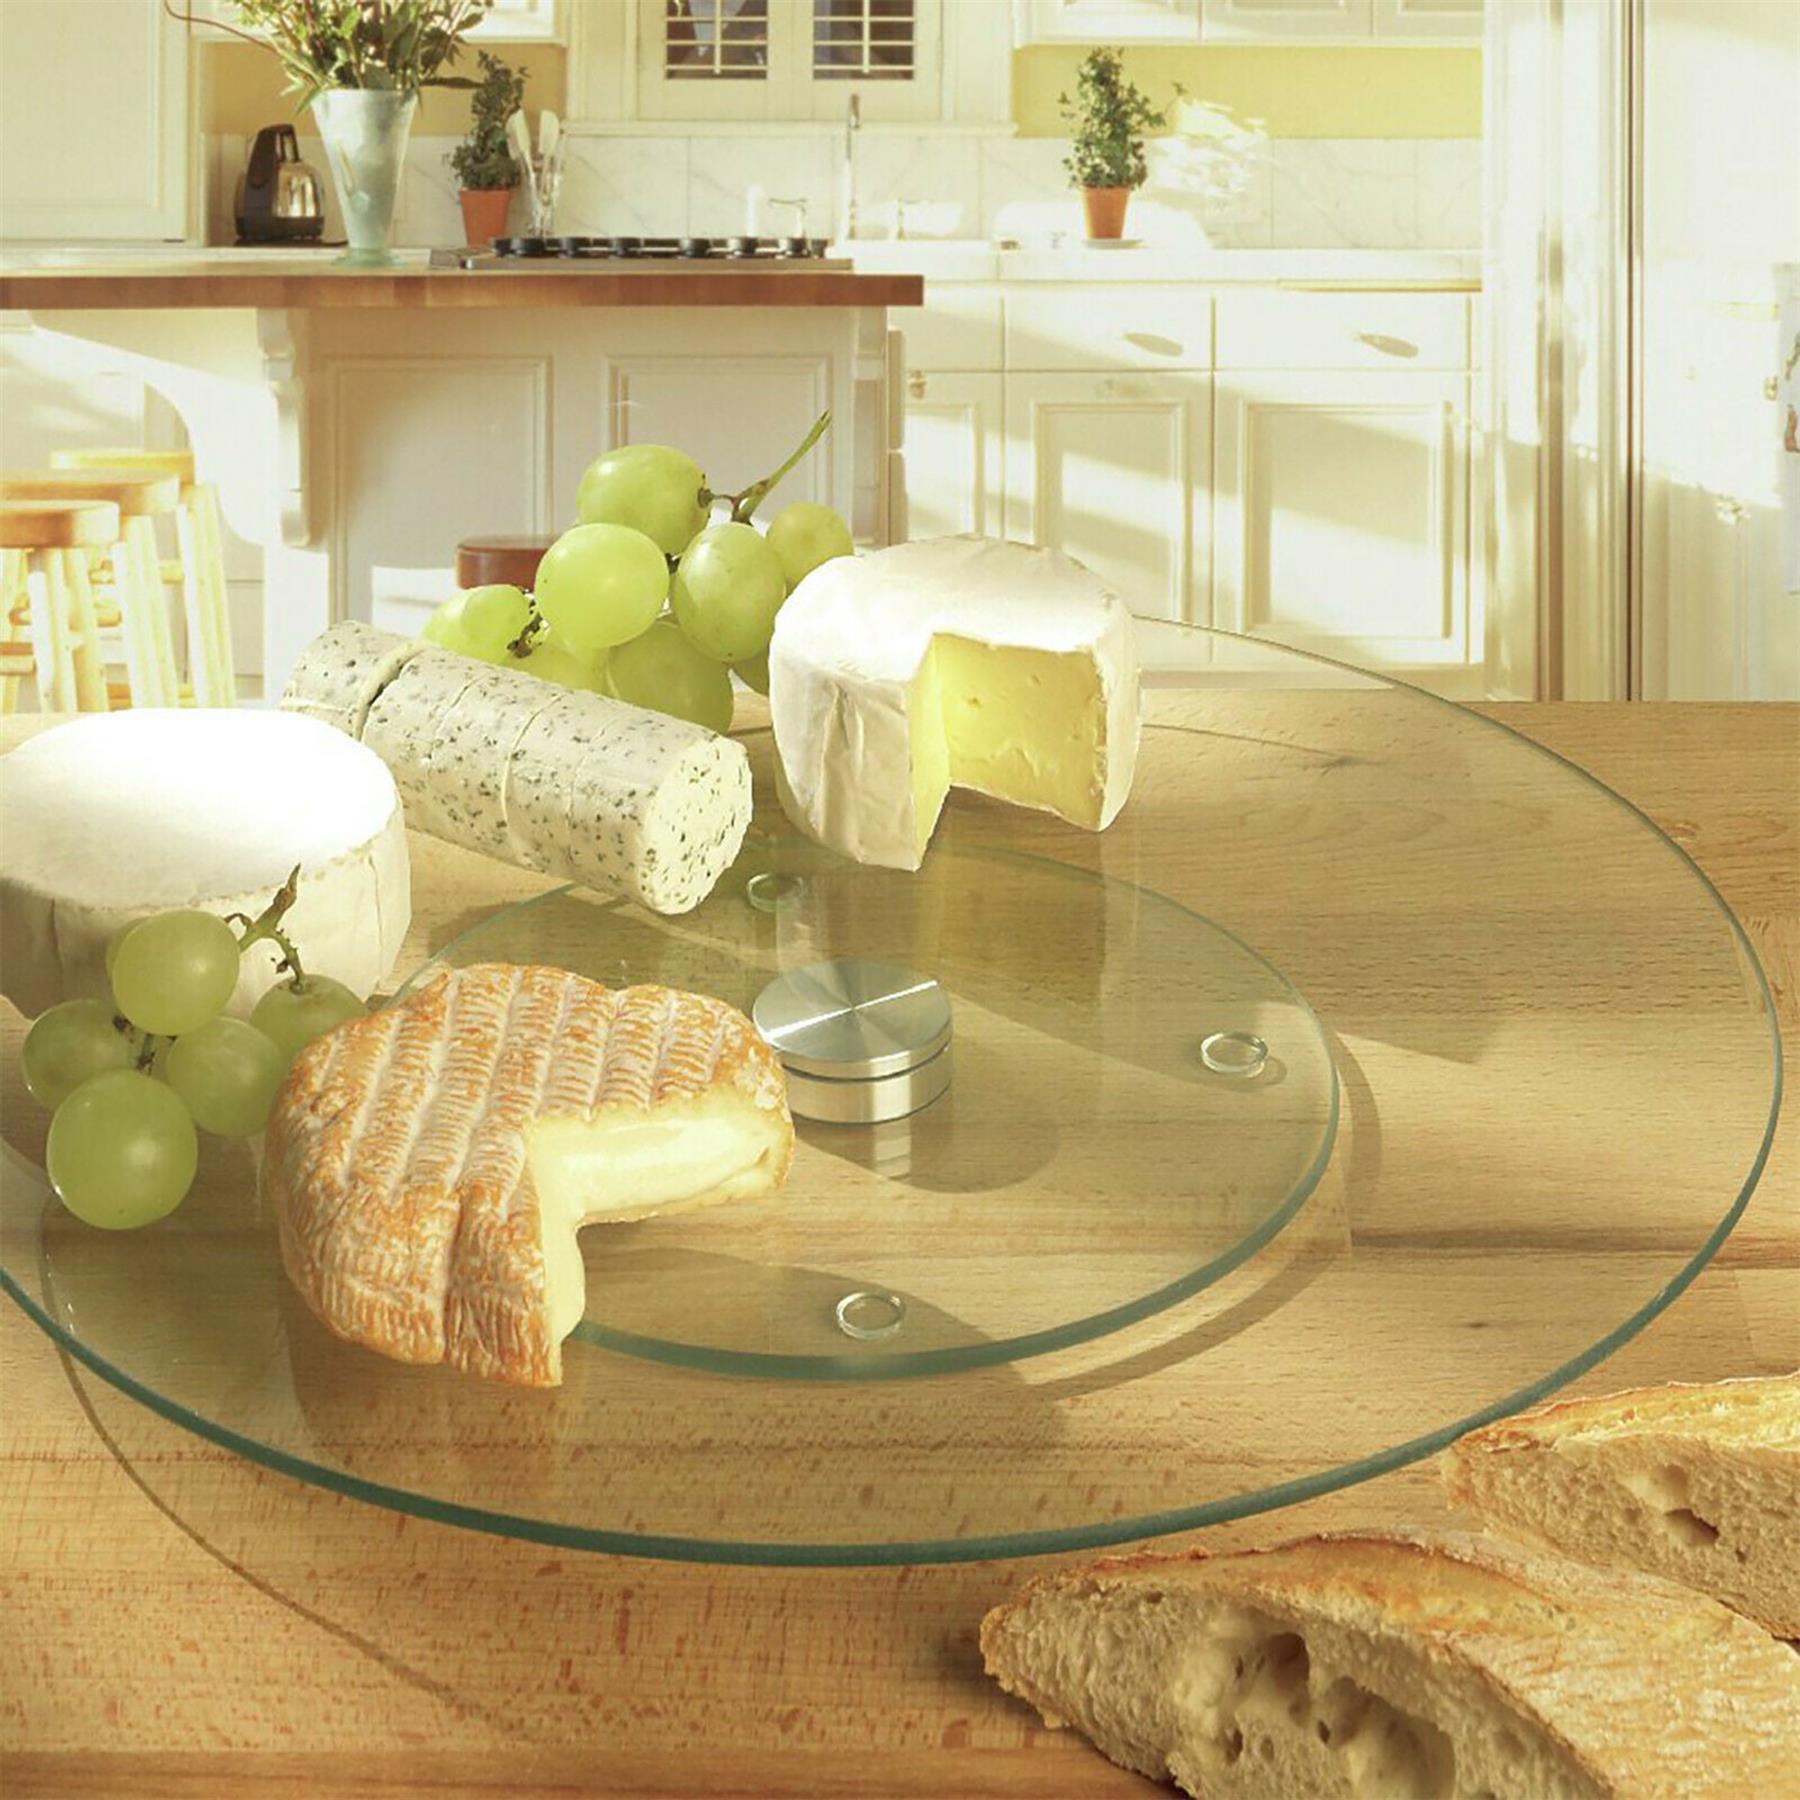 ROTATING SERVING PLATE by Geezy - UKBuyZone